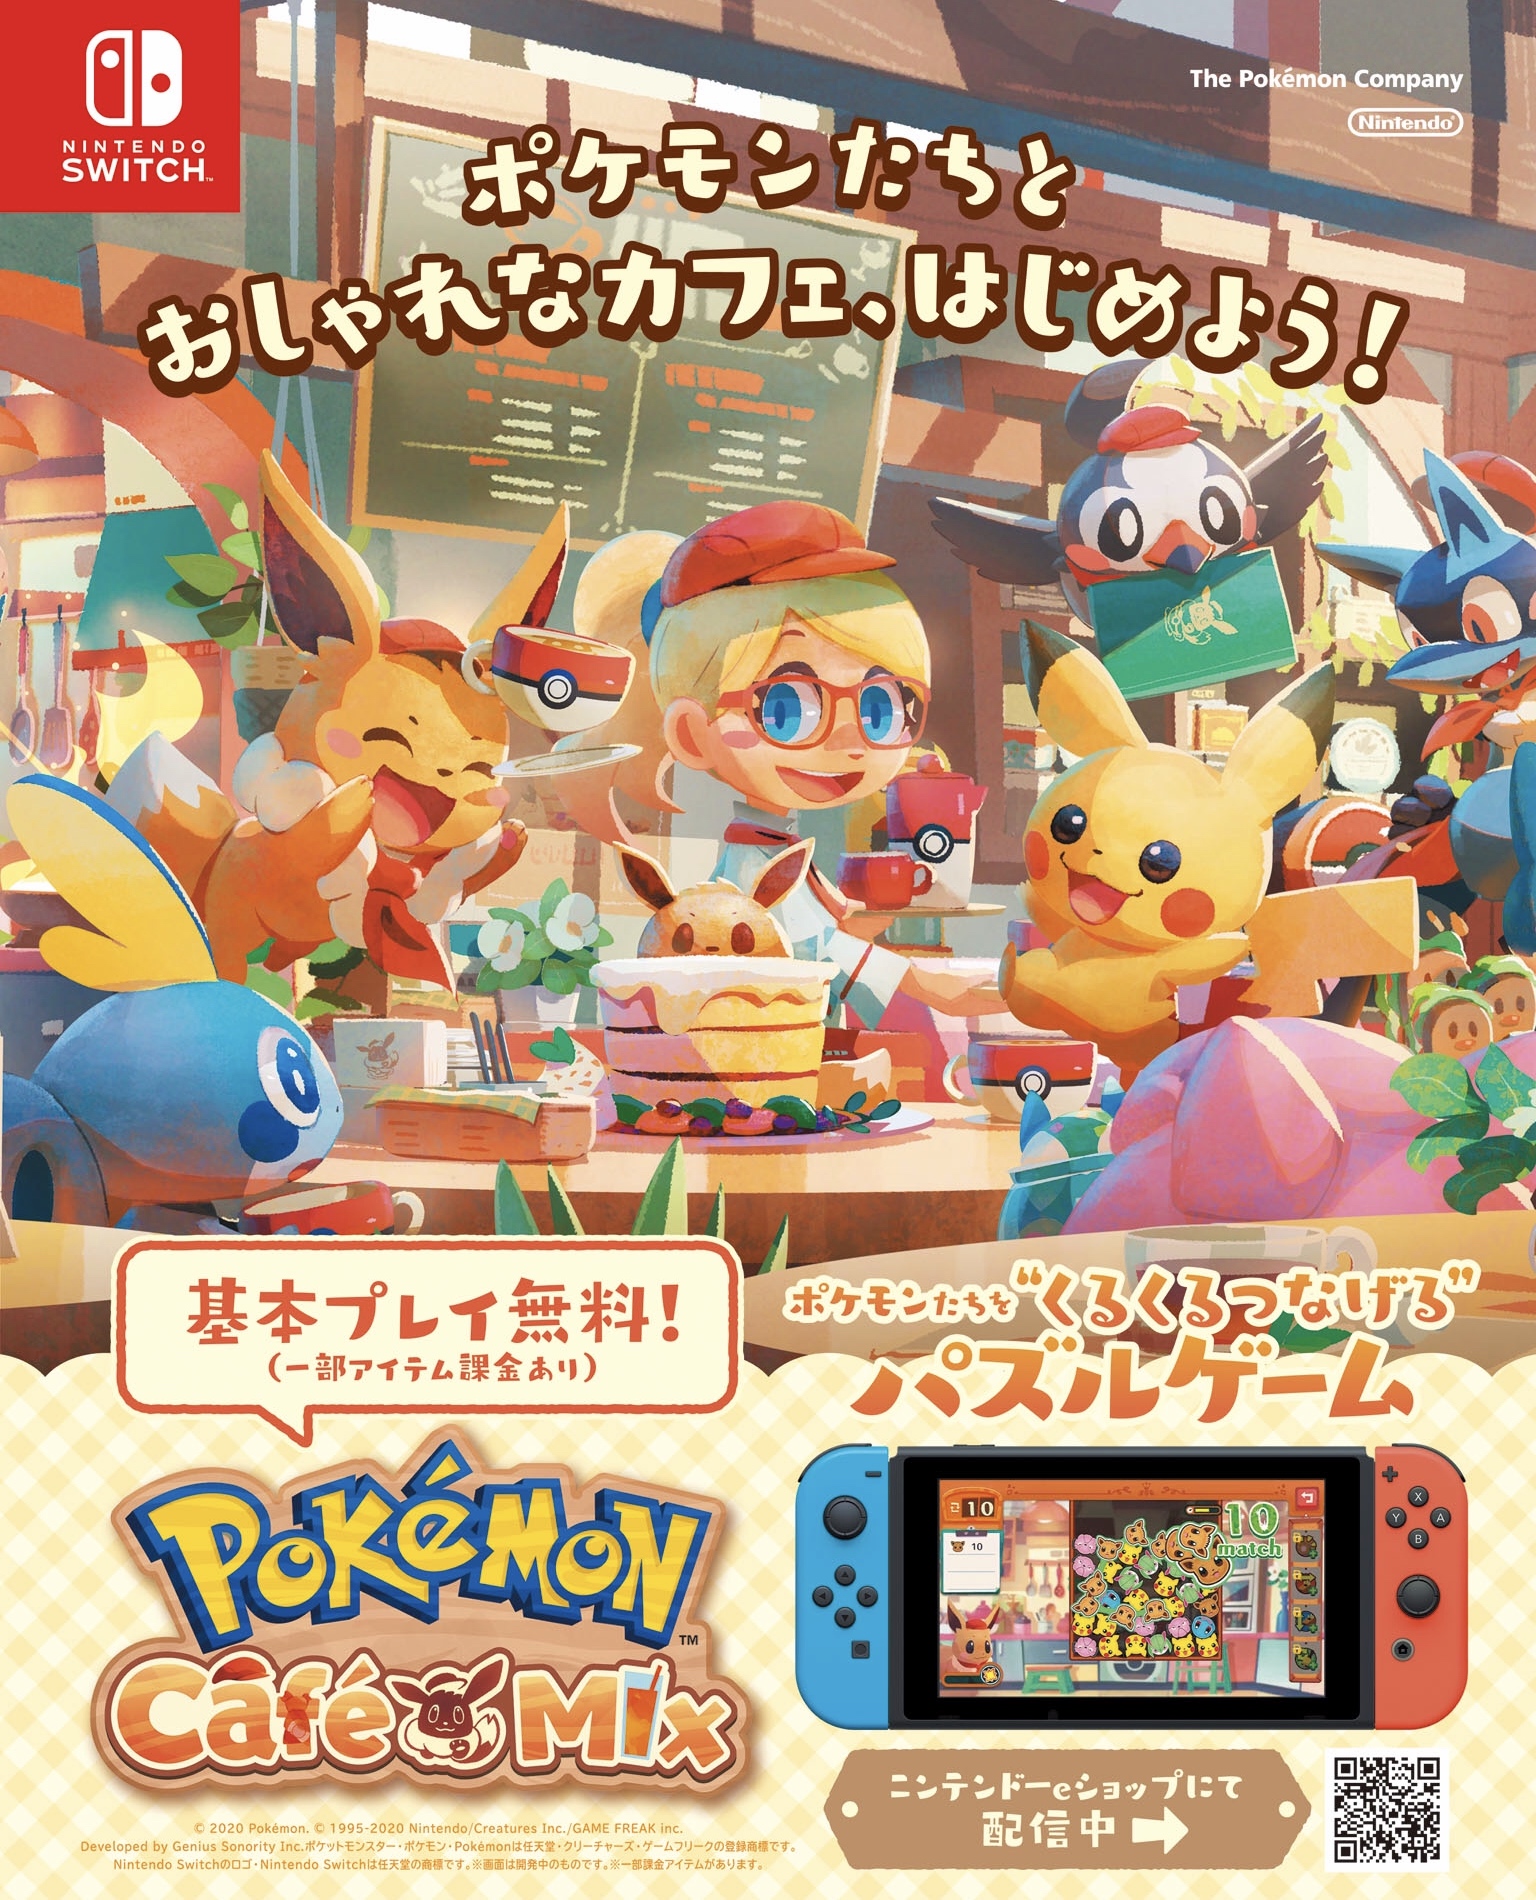 Latest Famitsu Features A Full Page Advert For Pokemon Cafe Mix Gonintendo